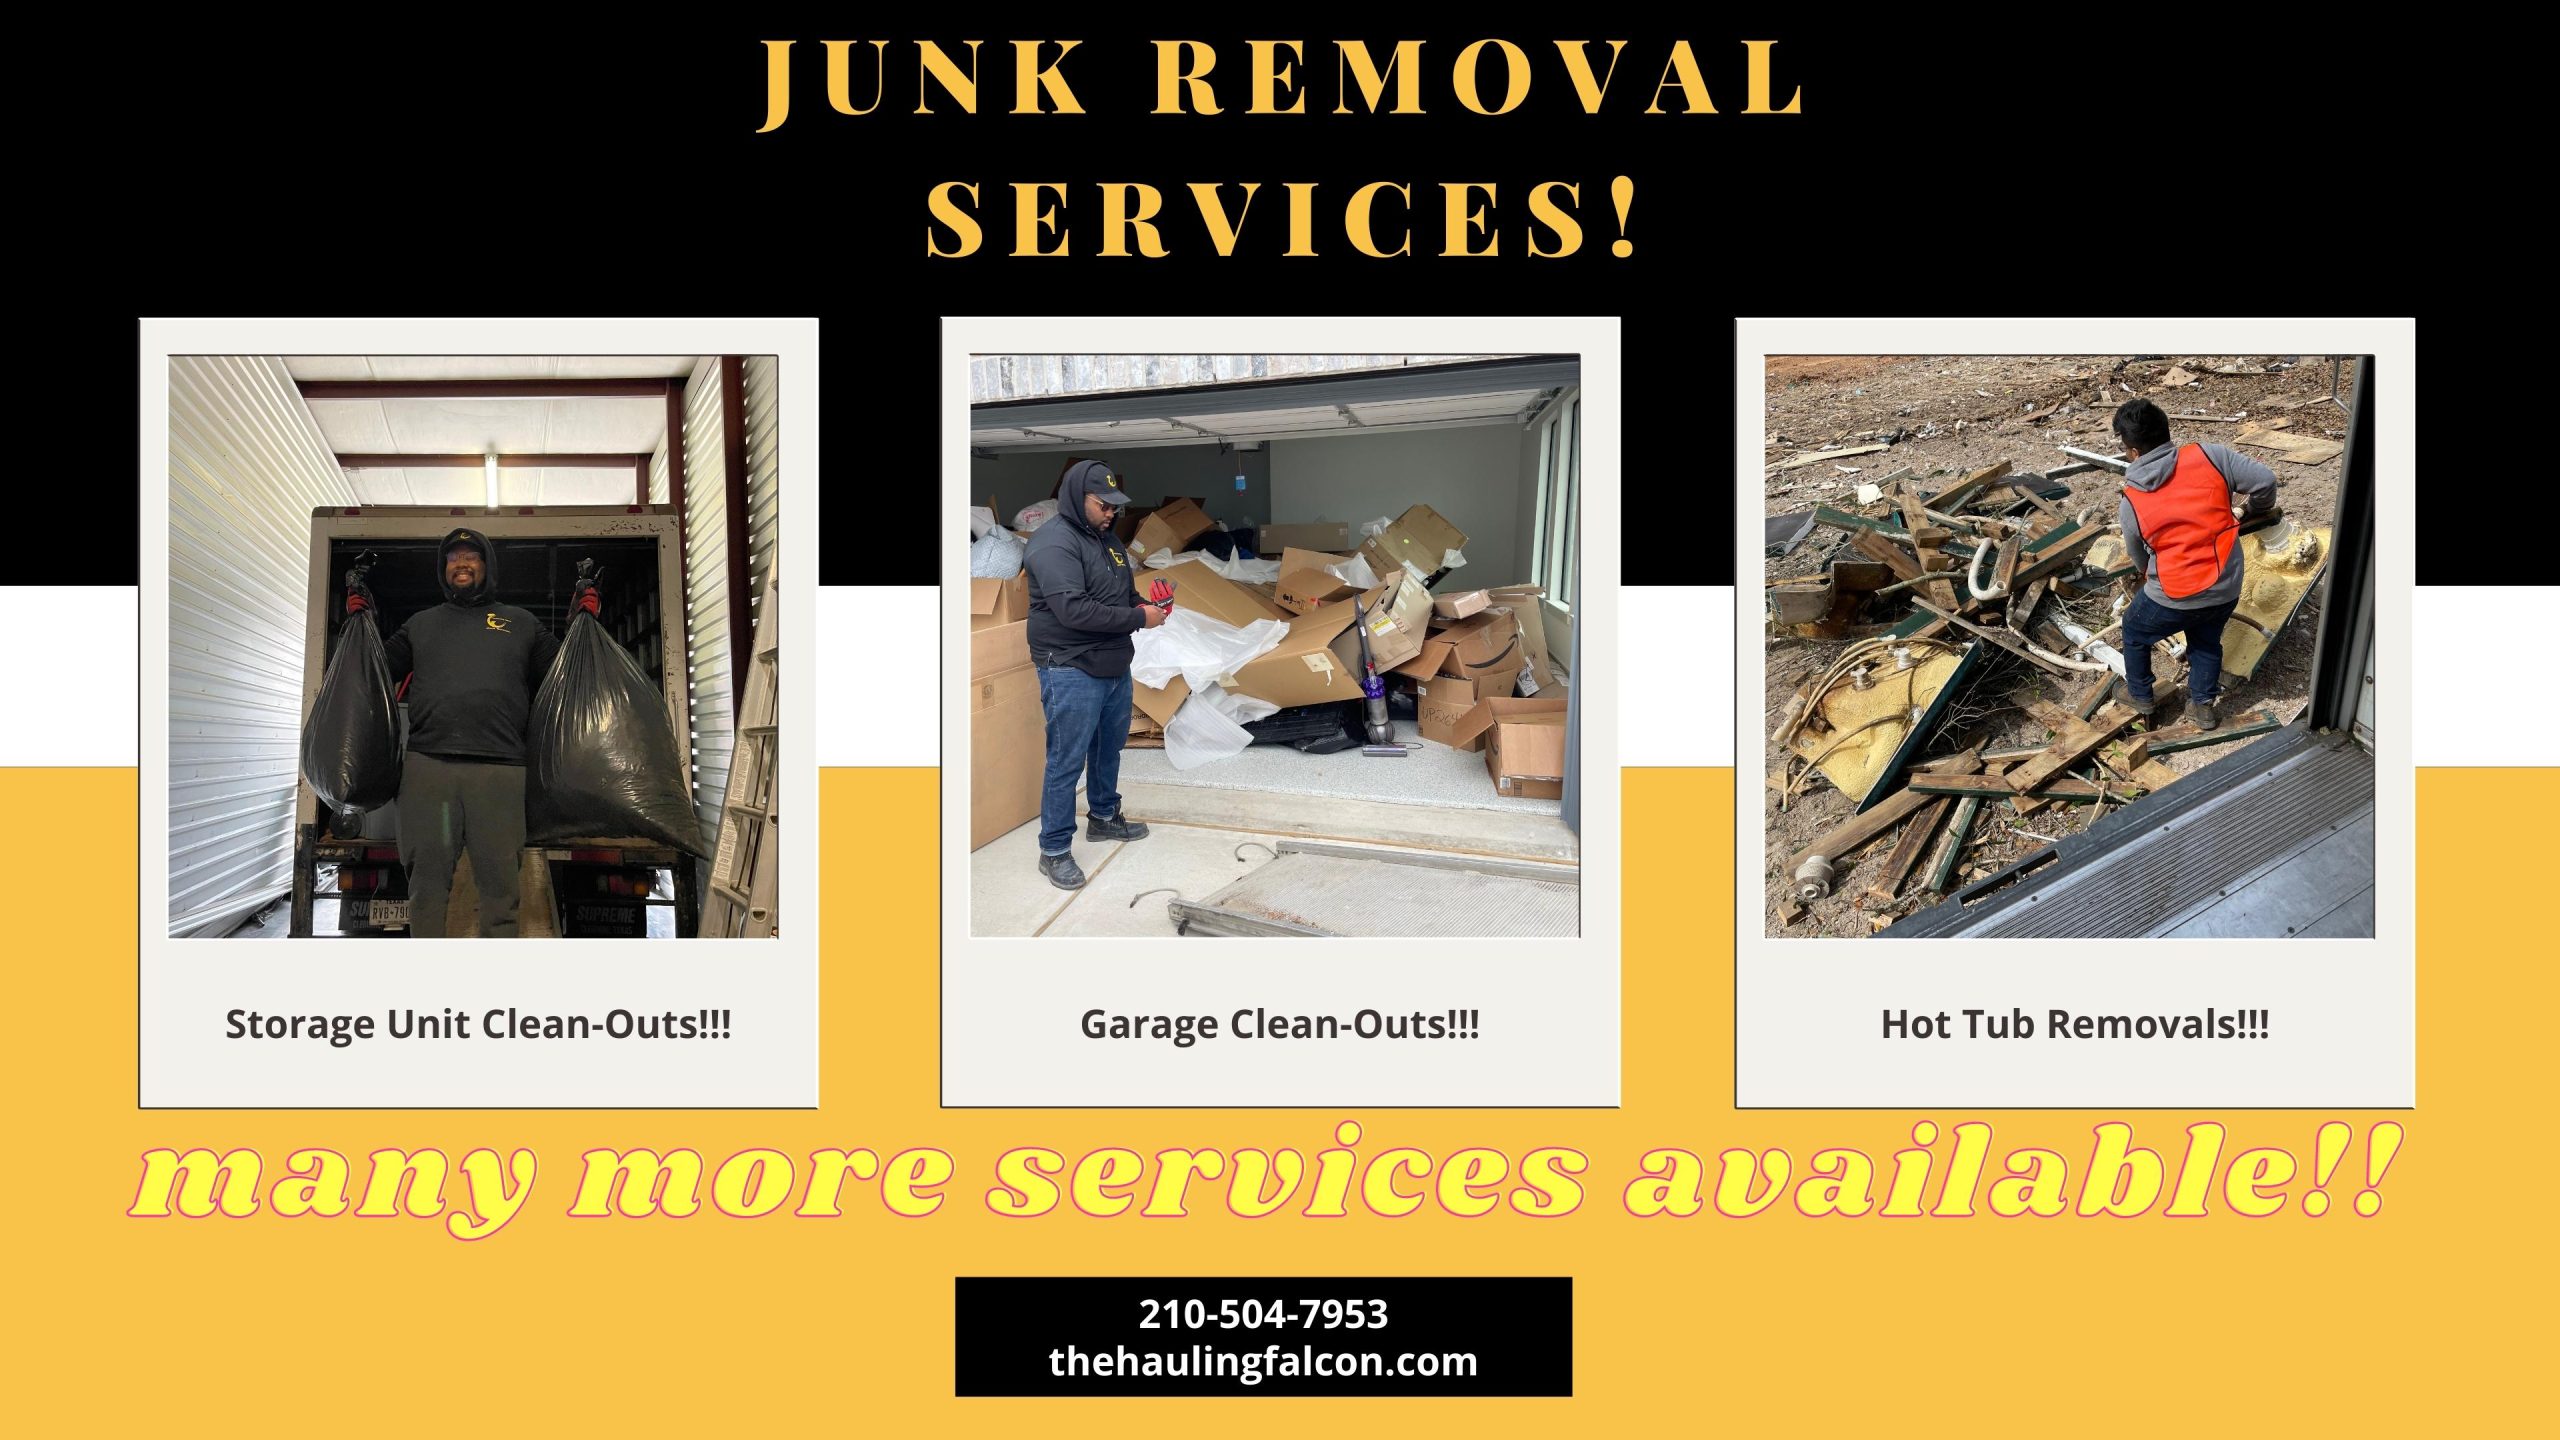 Junk Removal Houston: Creating Clutter-Free Environments